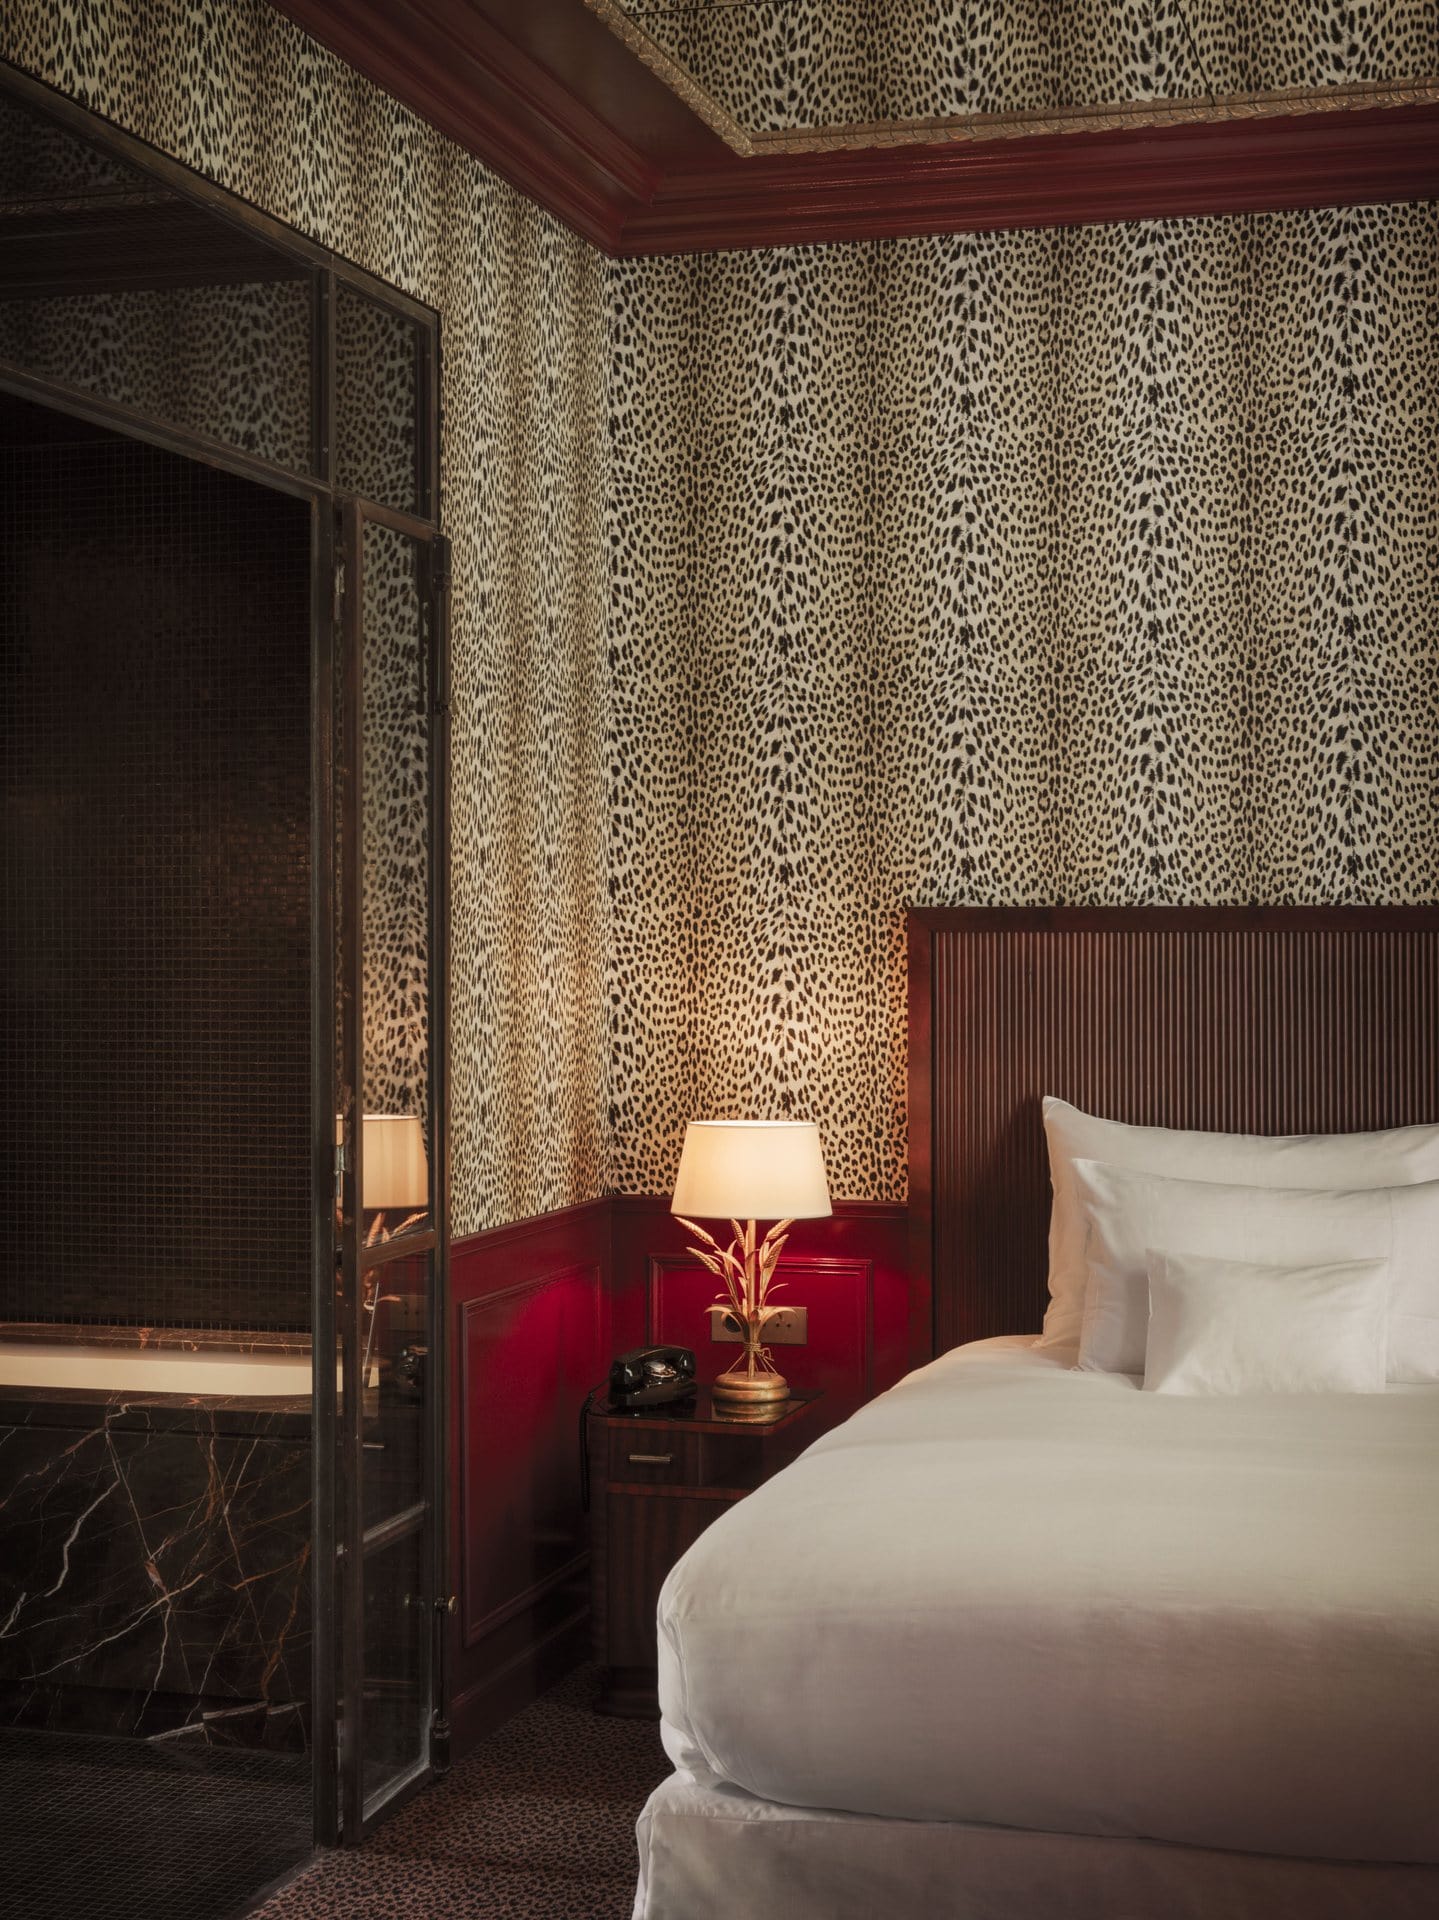 A leopard print wallpaper and red wainscoting for one of the guestrooms at Hôtel Particulier Montmartre